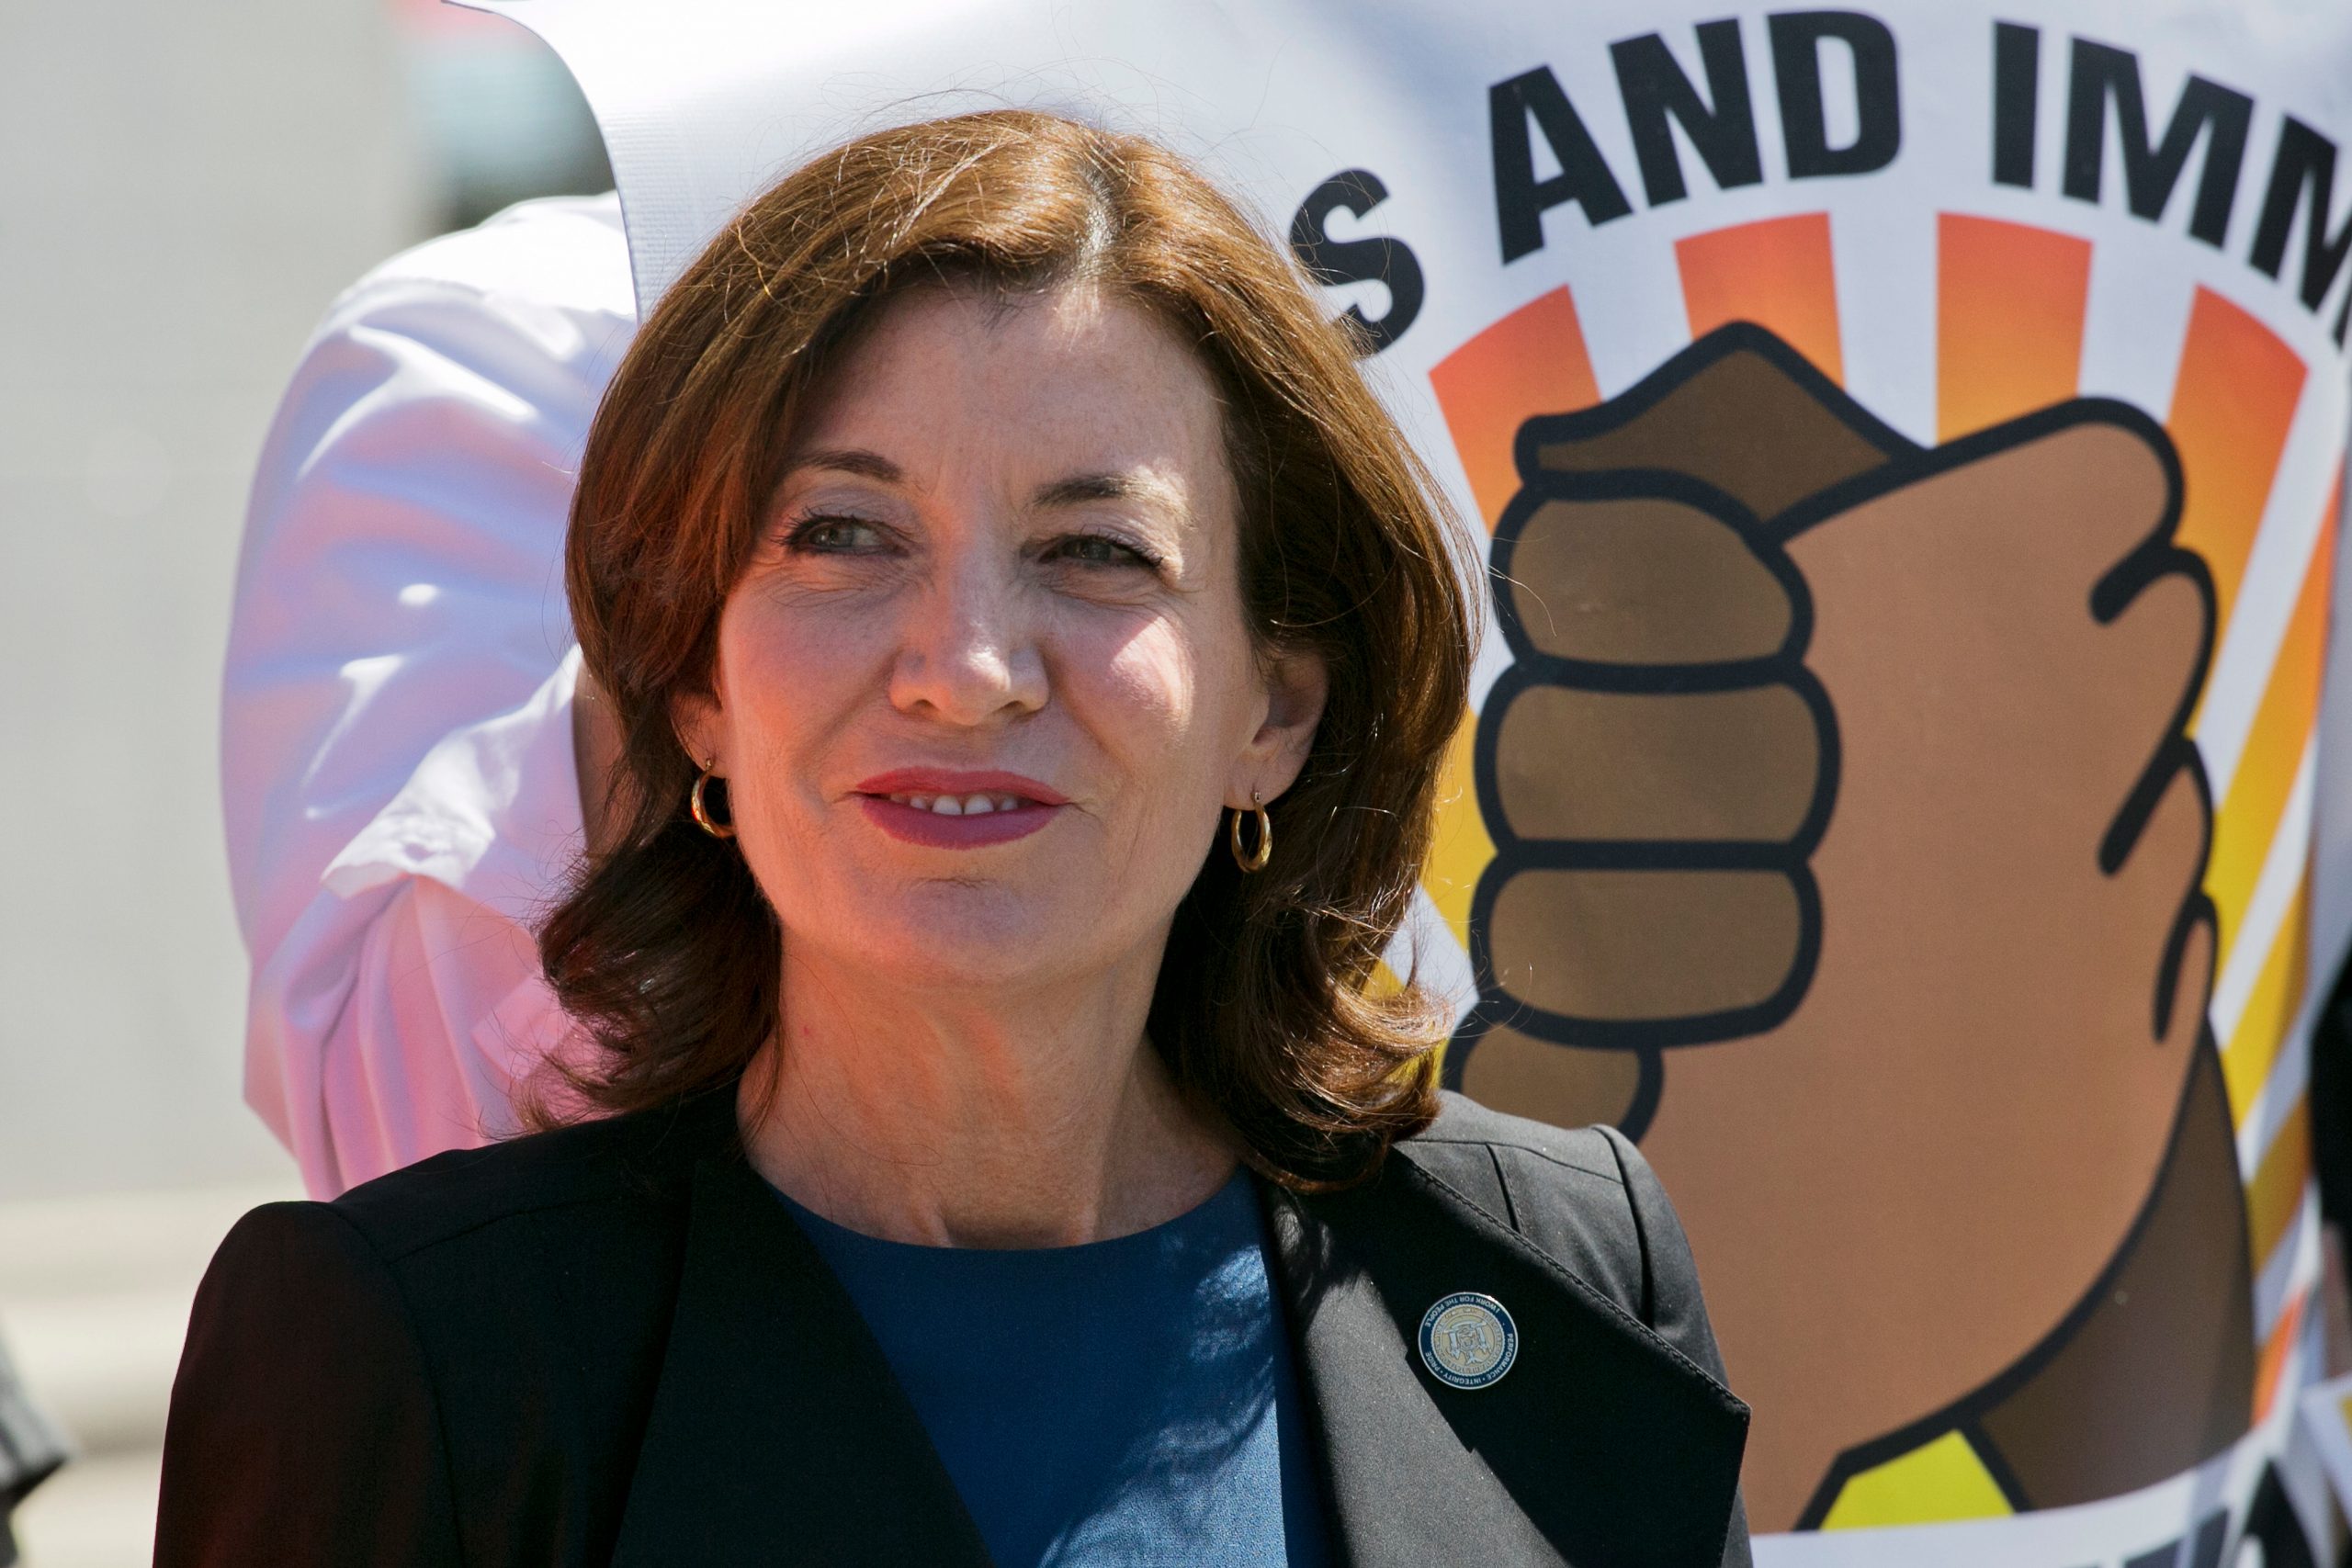 Kathy Hochul to run for Governor next year